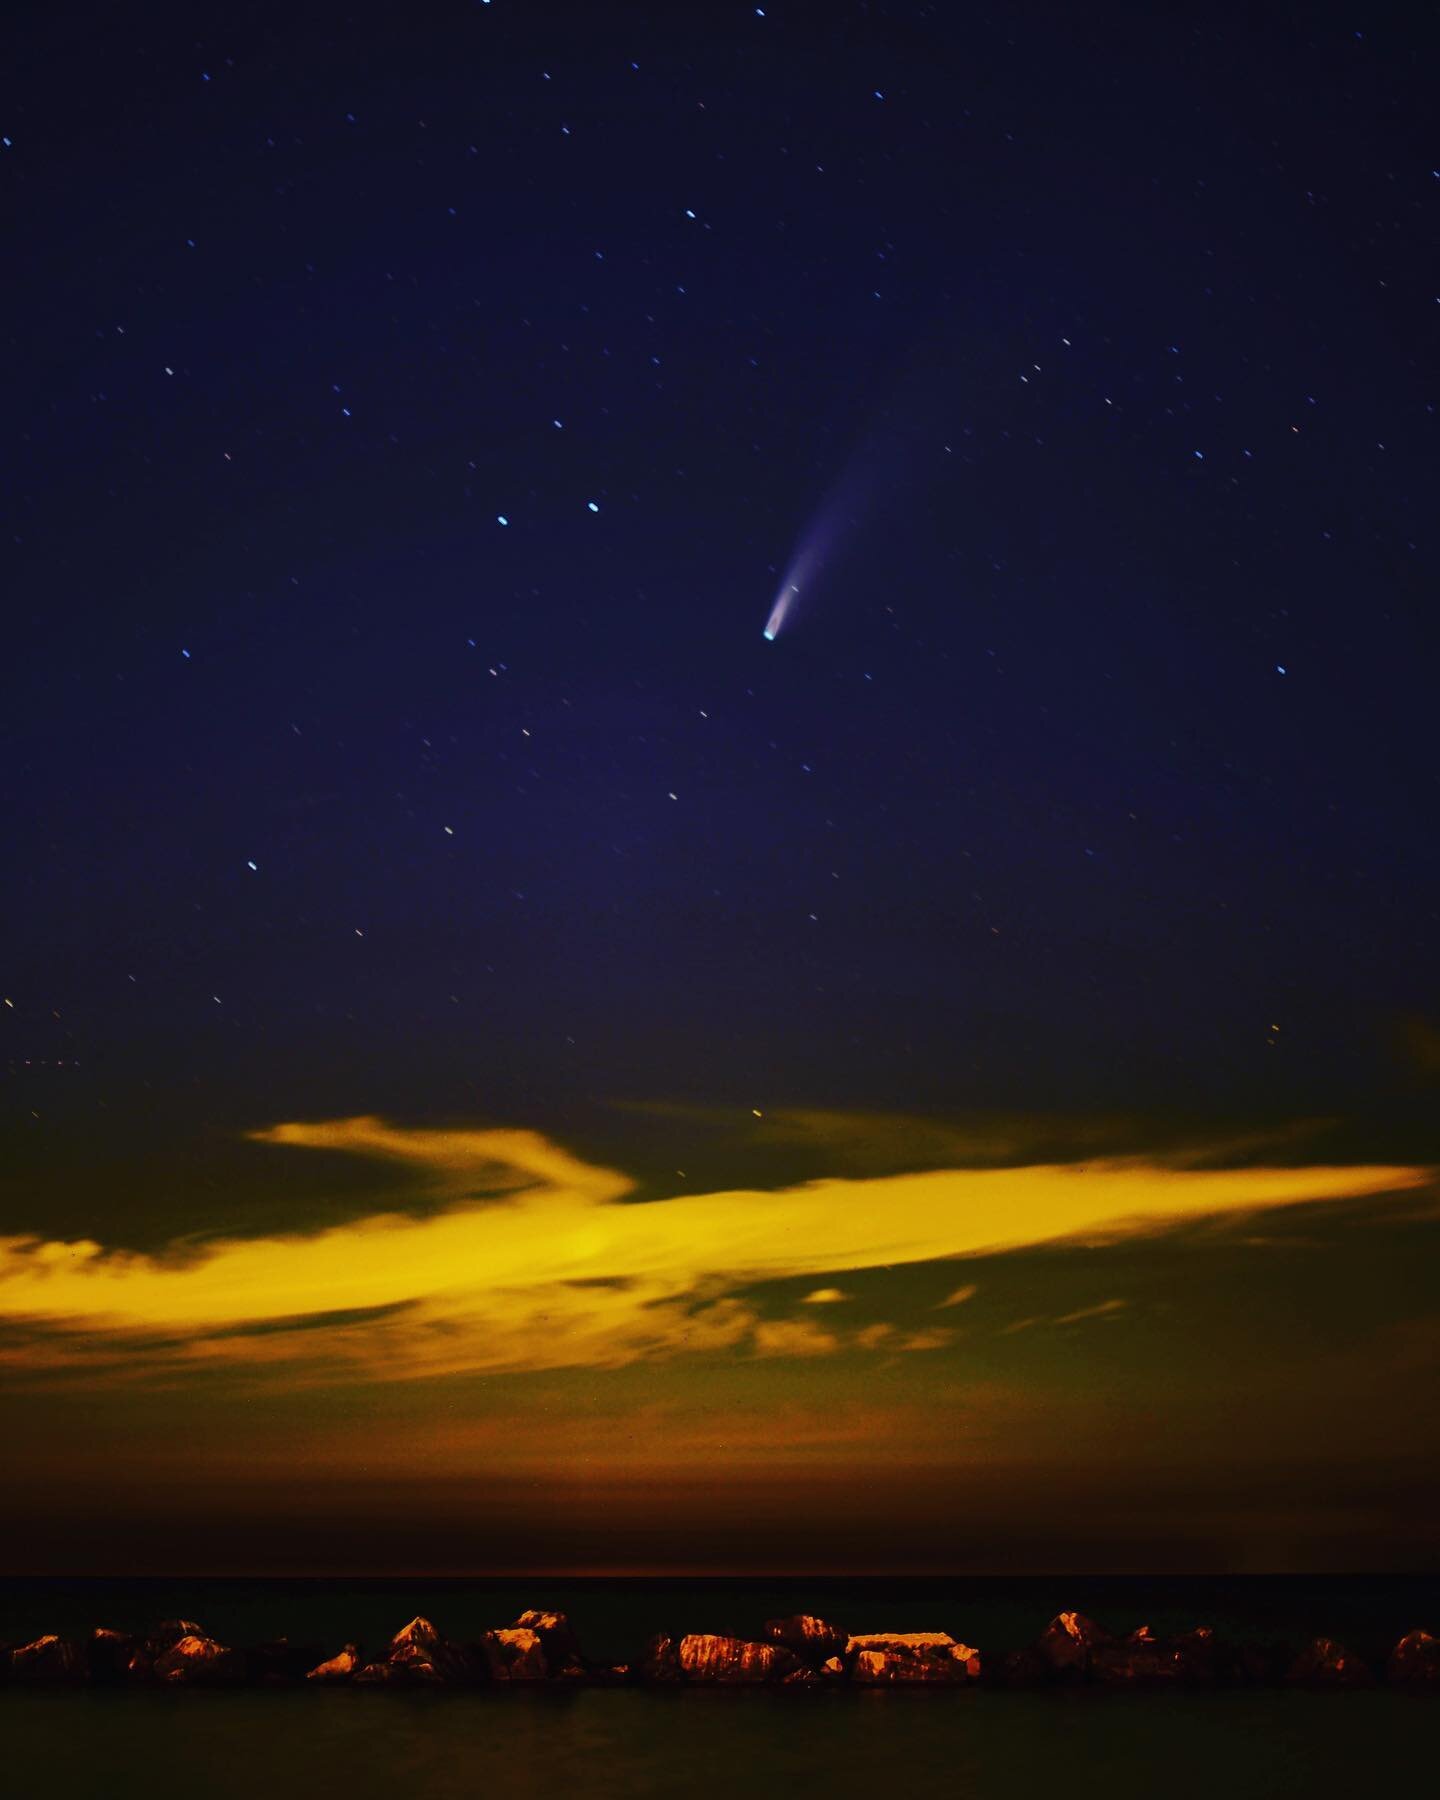 If you look just below the Big Dipper, you will be able to see Comet NEOWISE in the night sky. Although the comet is 70-million miles away from Earth, it is still visible with the naked eye in the northern part of the U.S. as it passes earth.
.
.
.
#